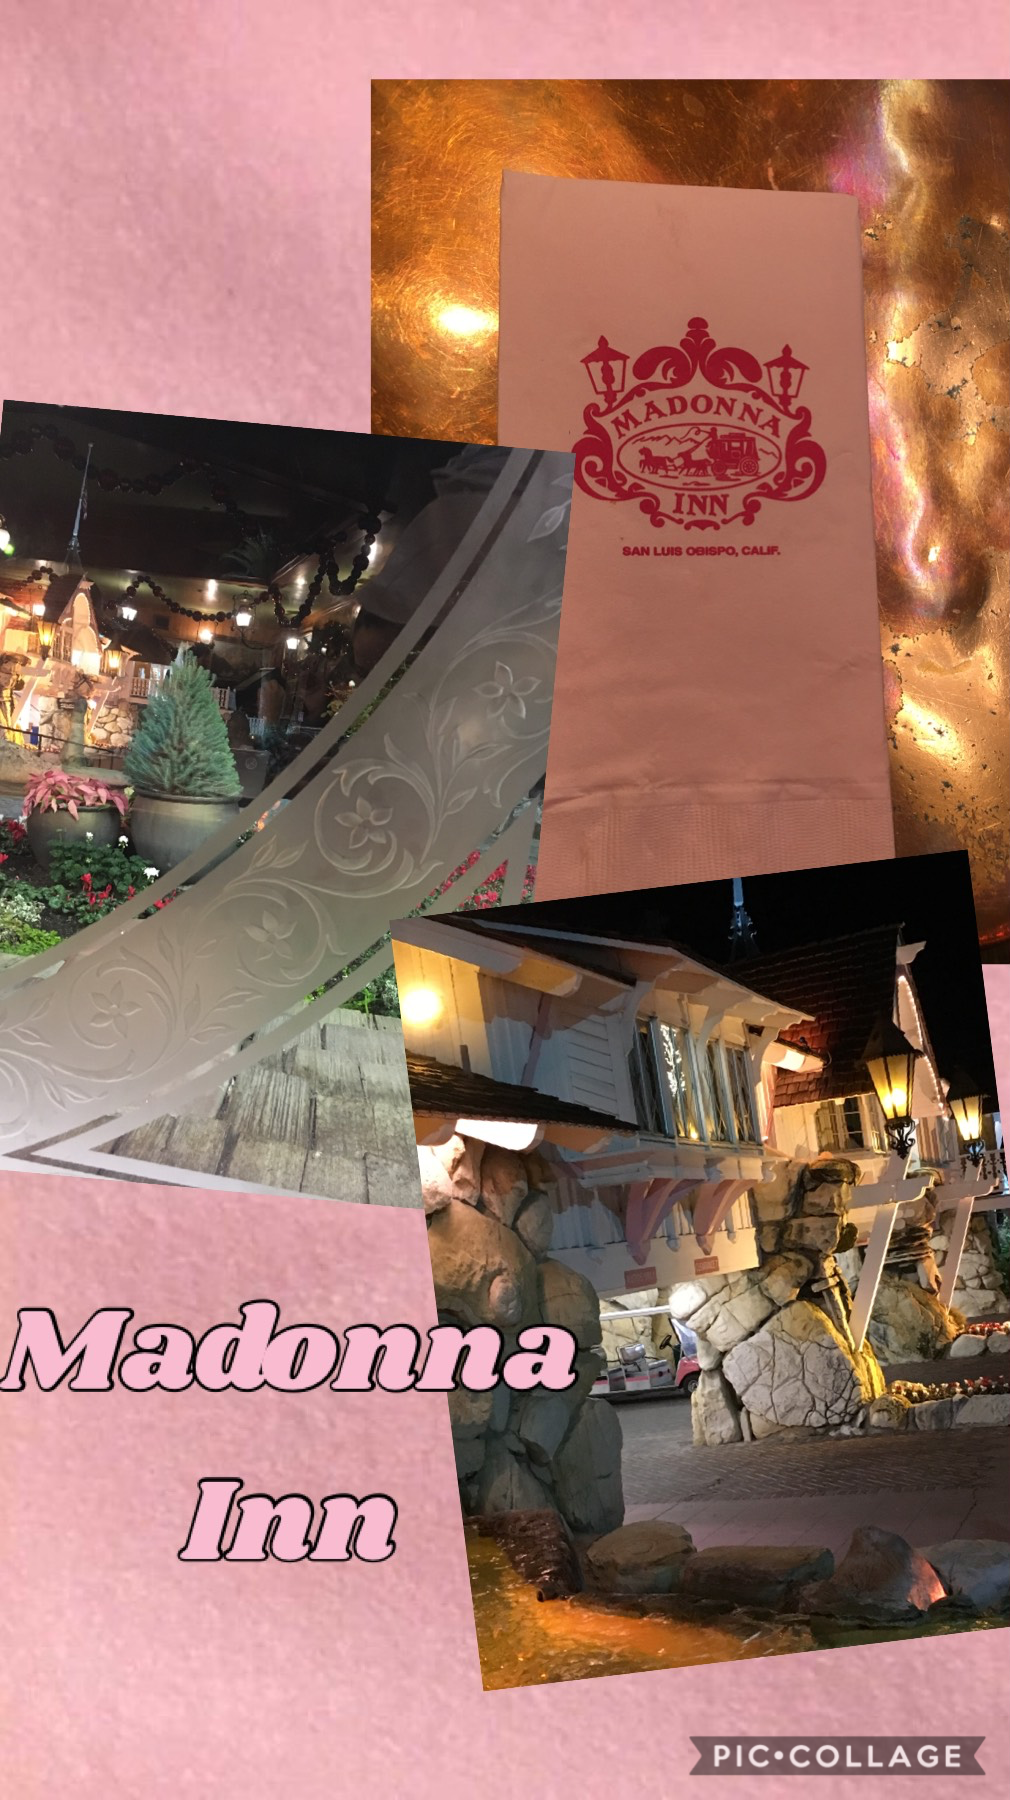 Hey guys!
So sorry I haven’t been posting. School has got me REALLY busy. But this one is just a REALLY fancy place where we live. Anyone that know Madonna inn give this collage a like!!!!!!